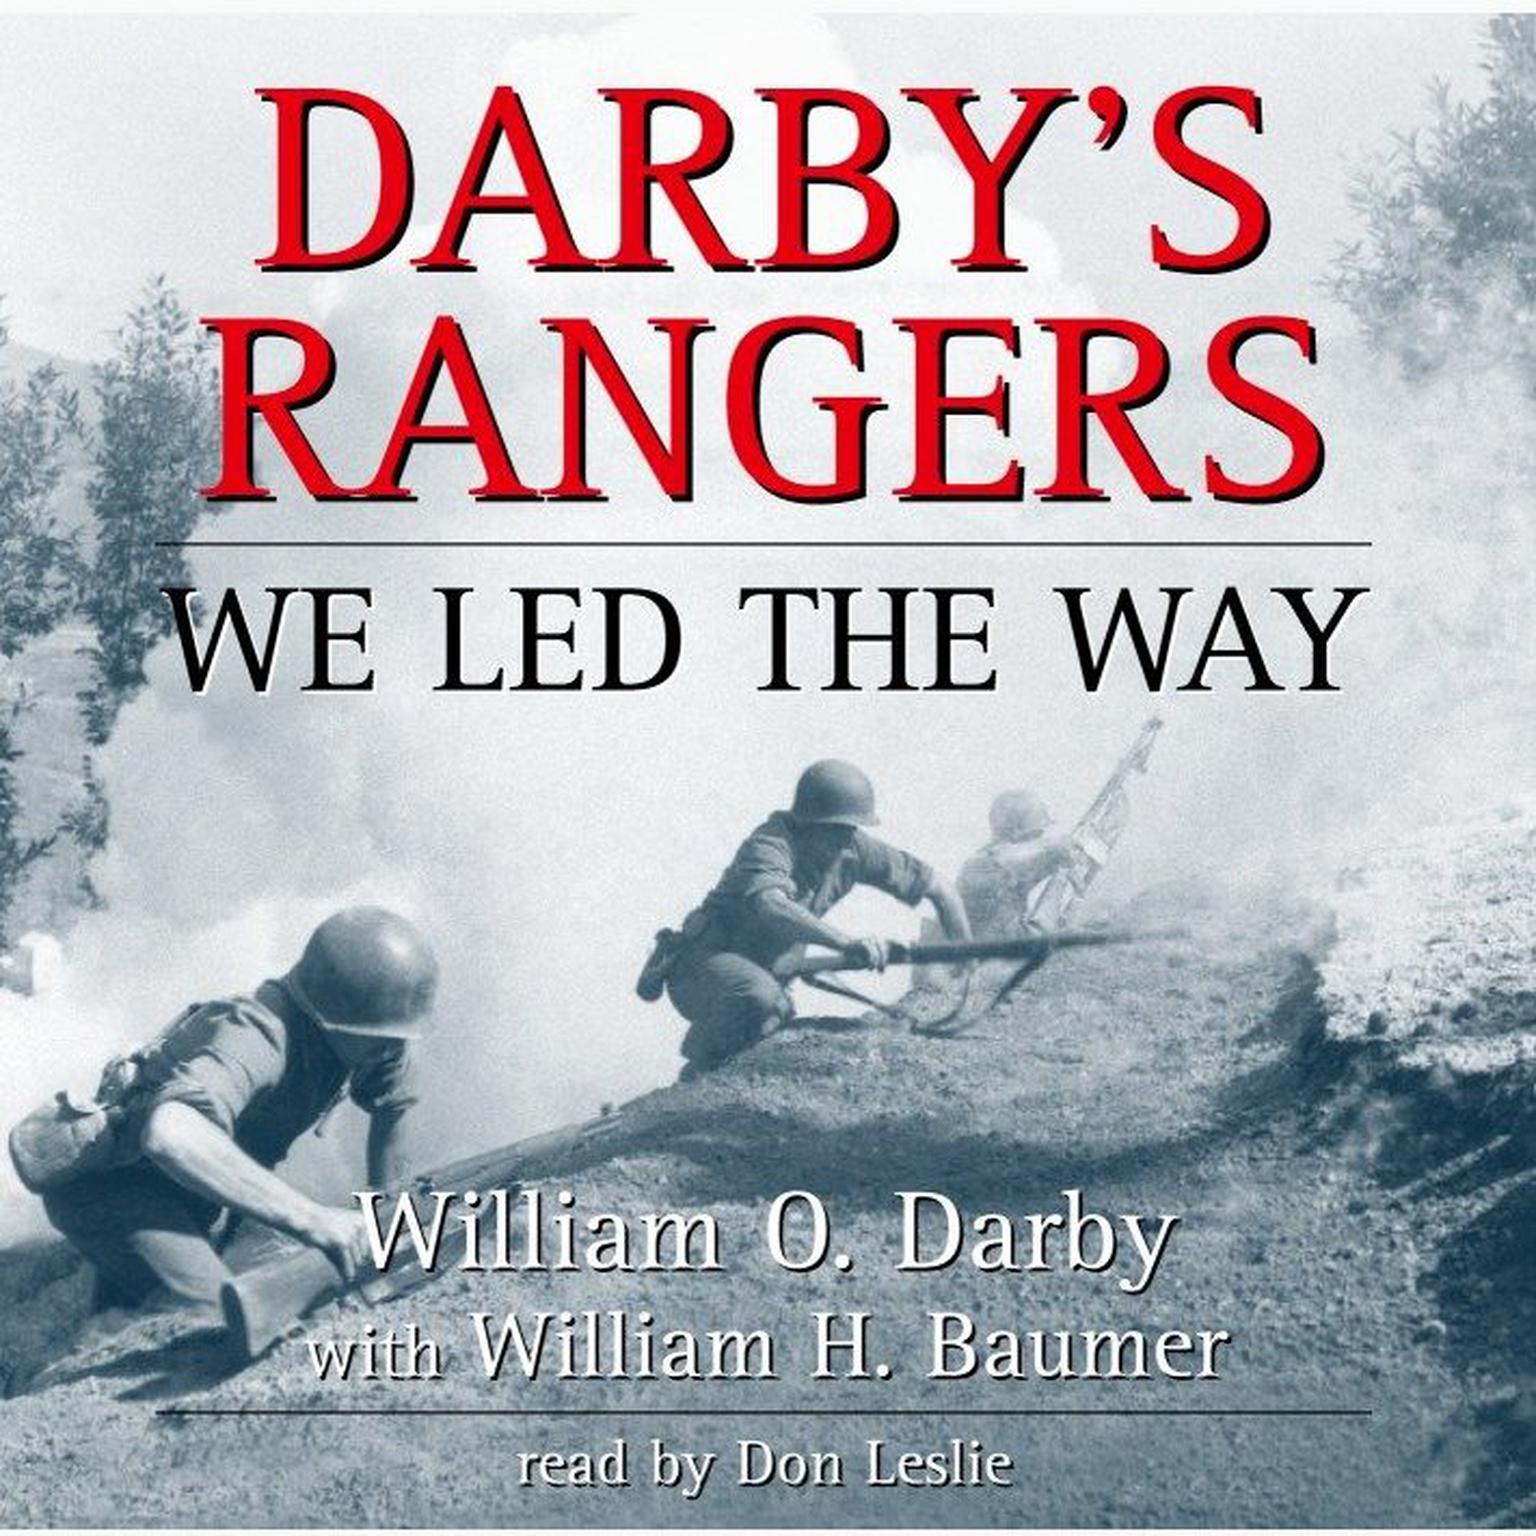 Darbys Rangers (Abridged): We Led the Way Audiobook, by William O. Darby